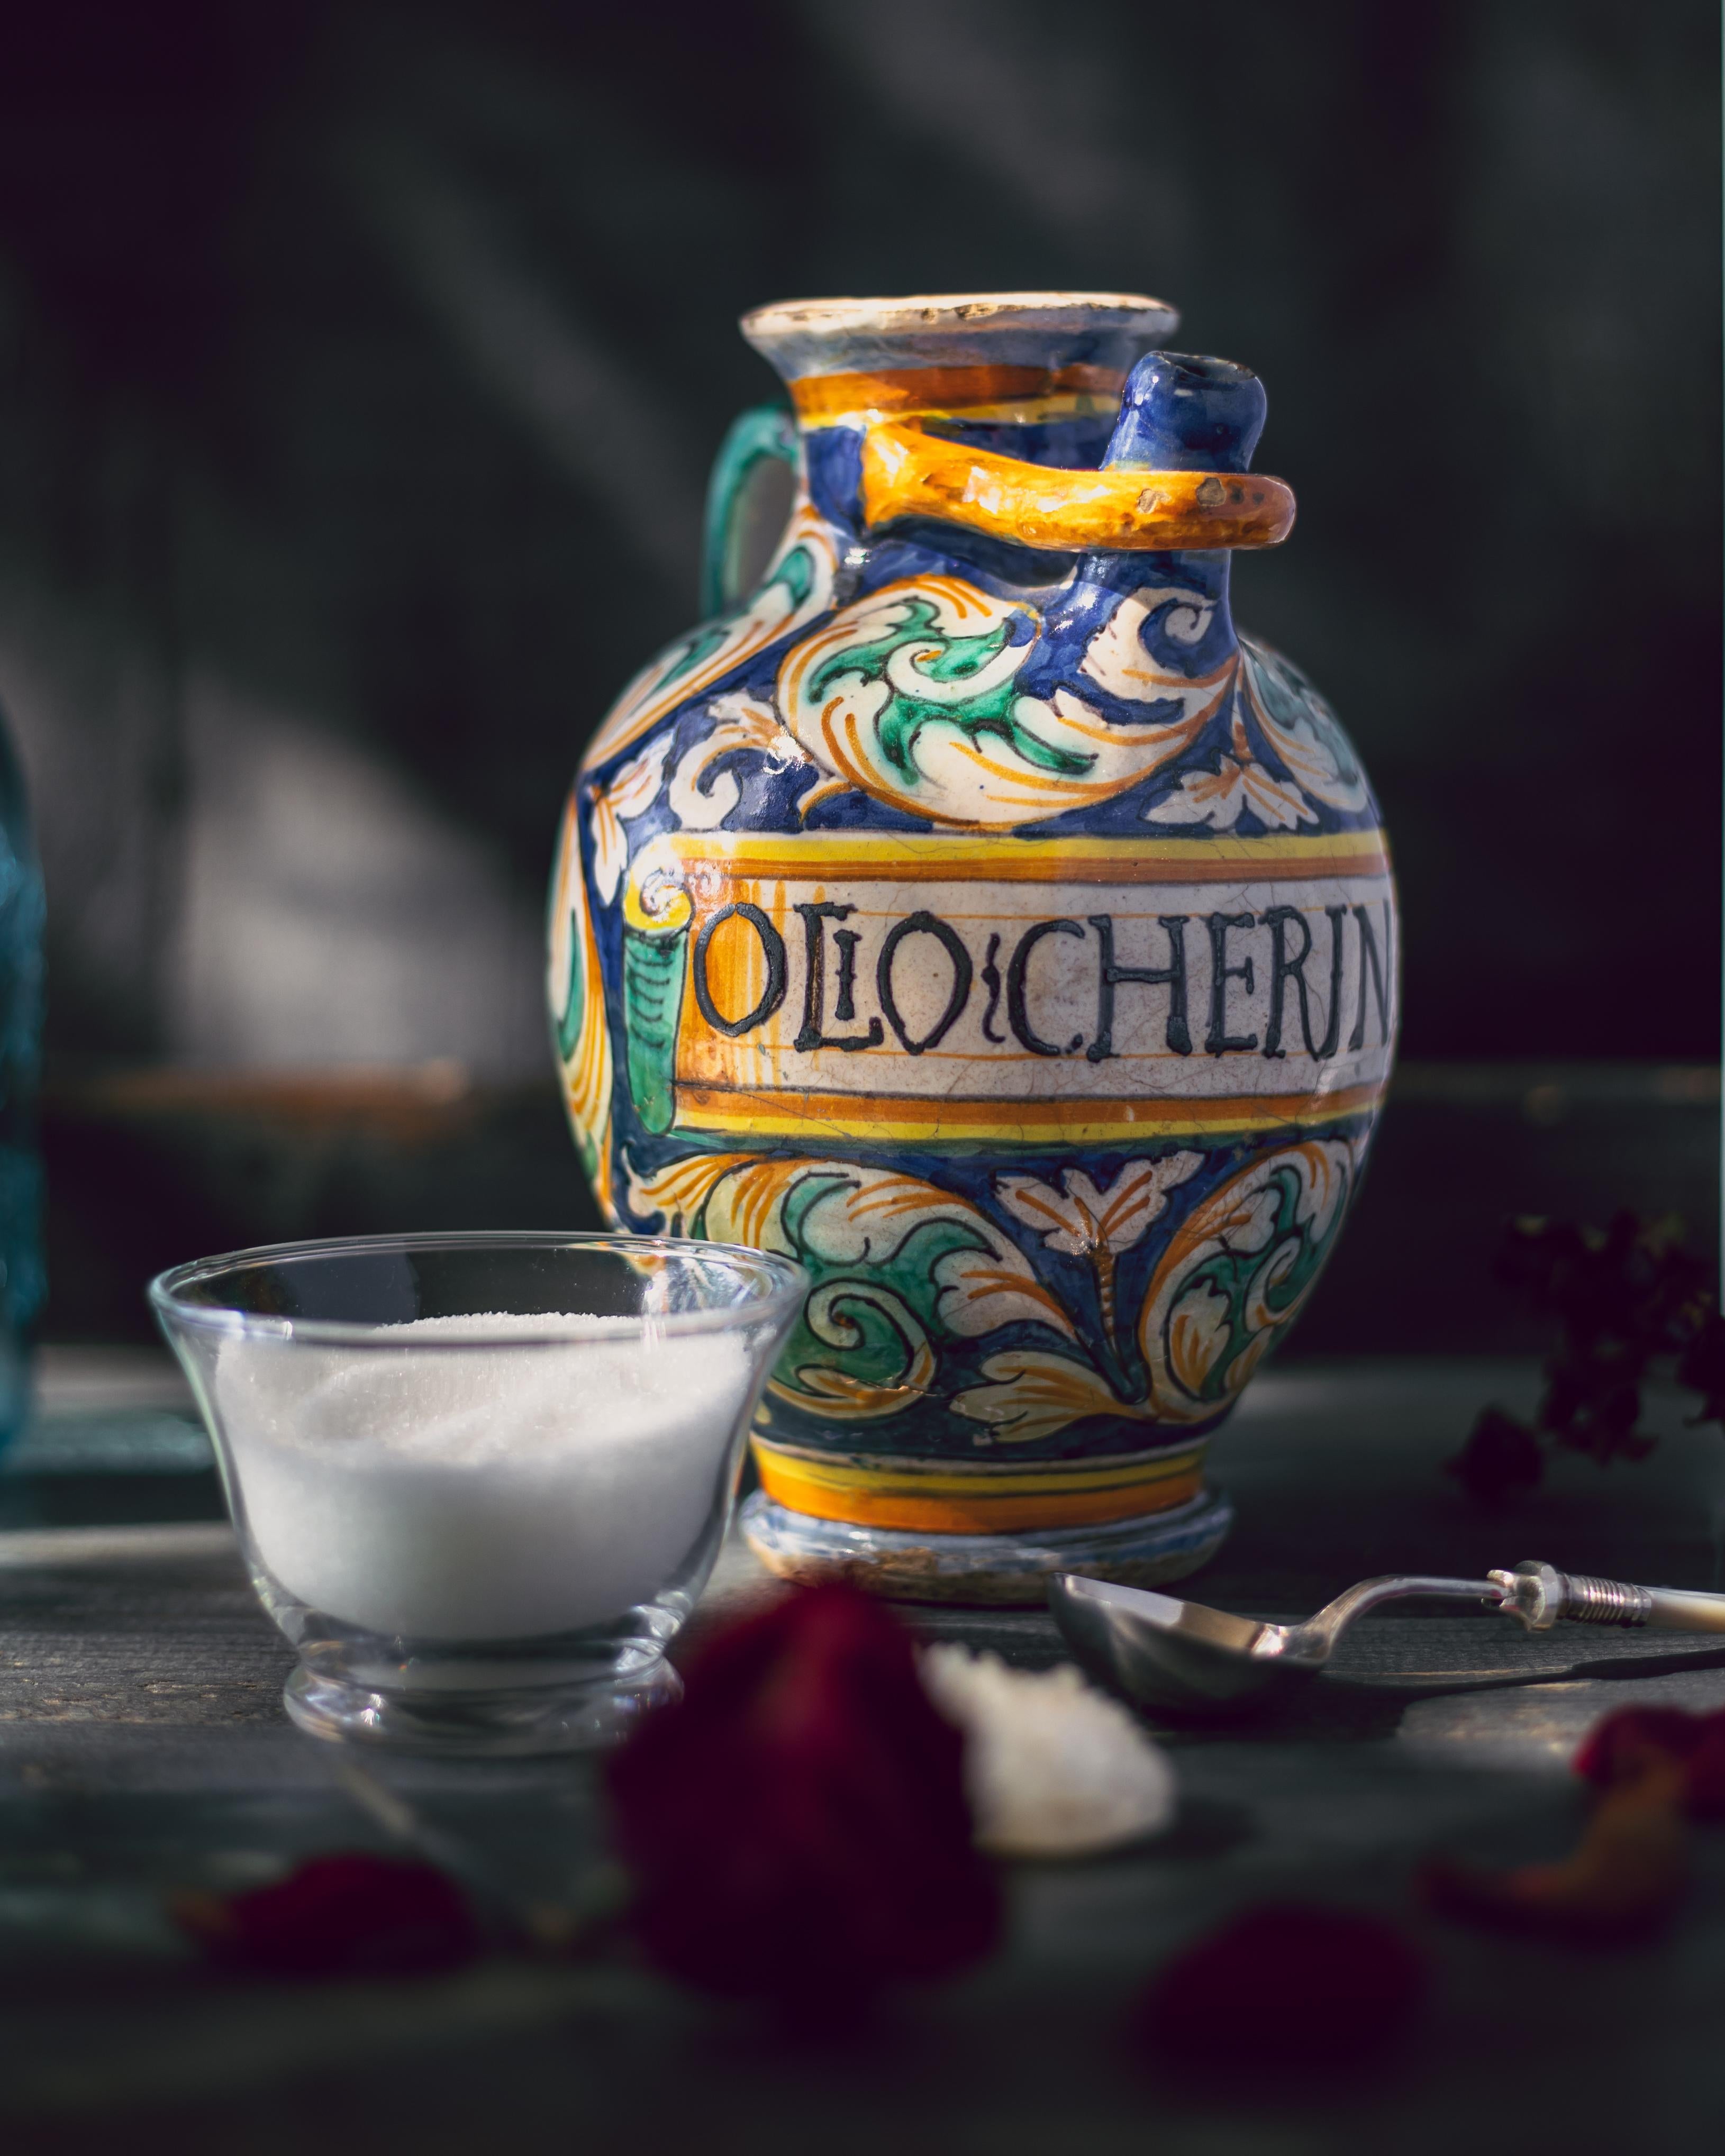 A 17th-century Italian maiolica pharmacy jar, or orciolo, with beautiful blue, green, and ochre decoration.

Throughout history, one of the main uses of ceramics was for the storage of liquids. This was particularly pertinent for apothecaries, who